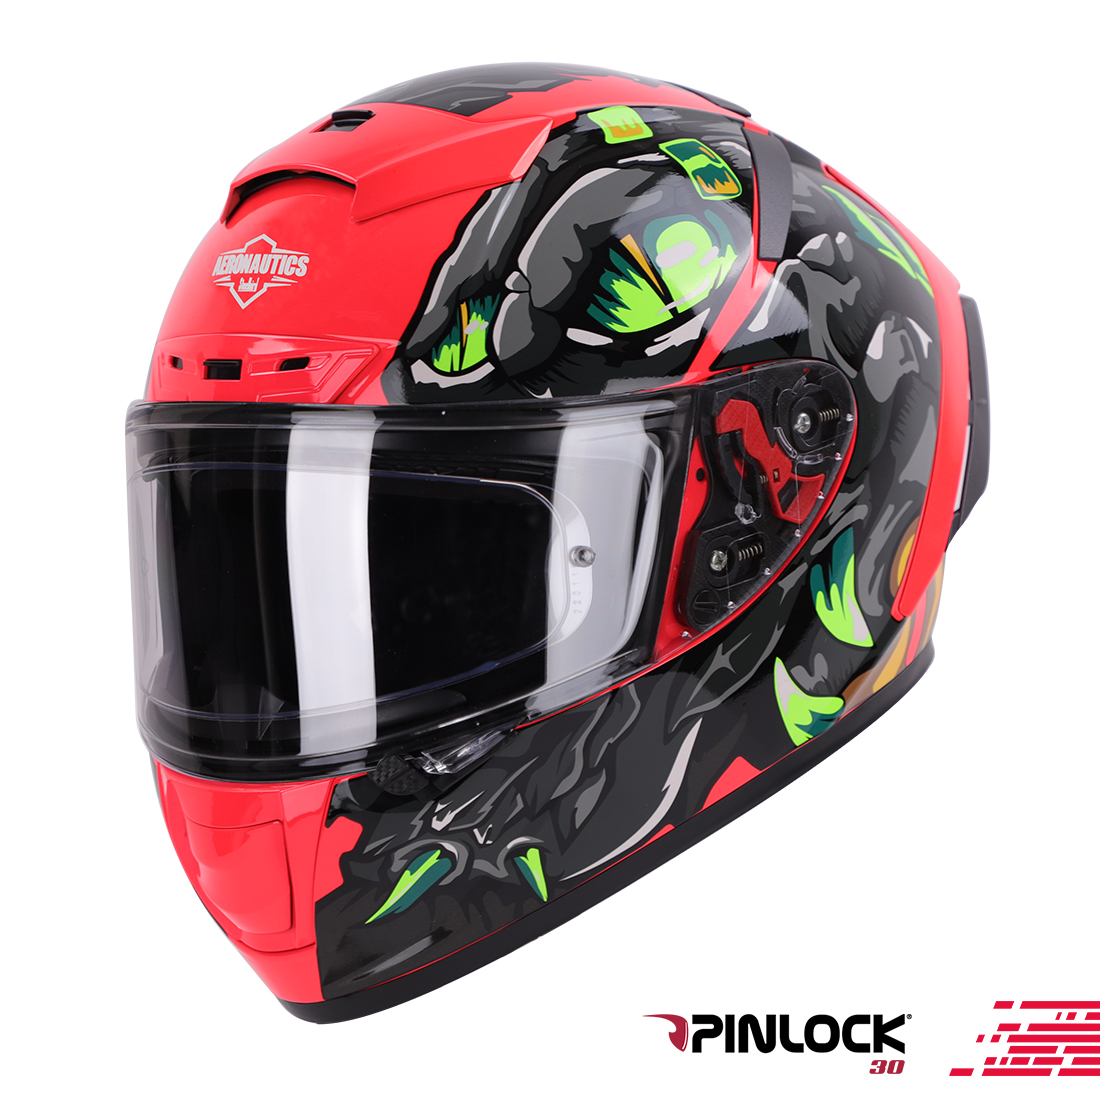 Steelbird SA-5 Monster ISI/DOT Certified Full Face Graphic Helmet With Outer Anti-Fog Clear Visor (Glossy Fluo Watermelon)